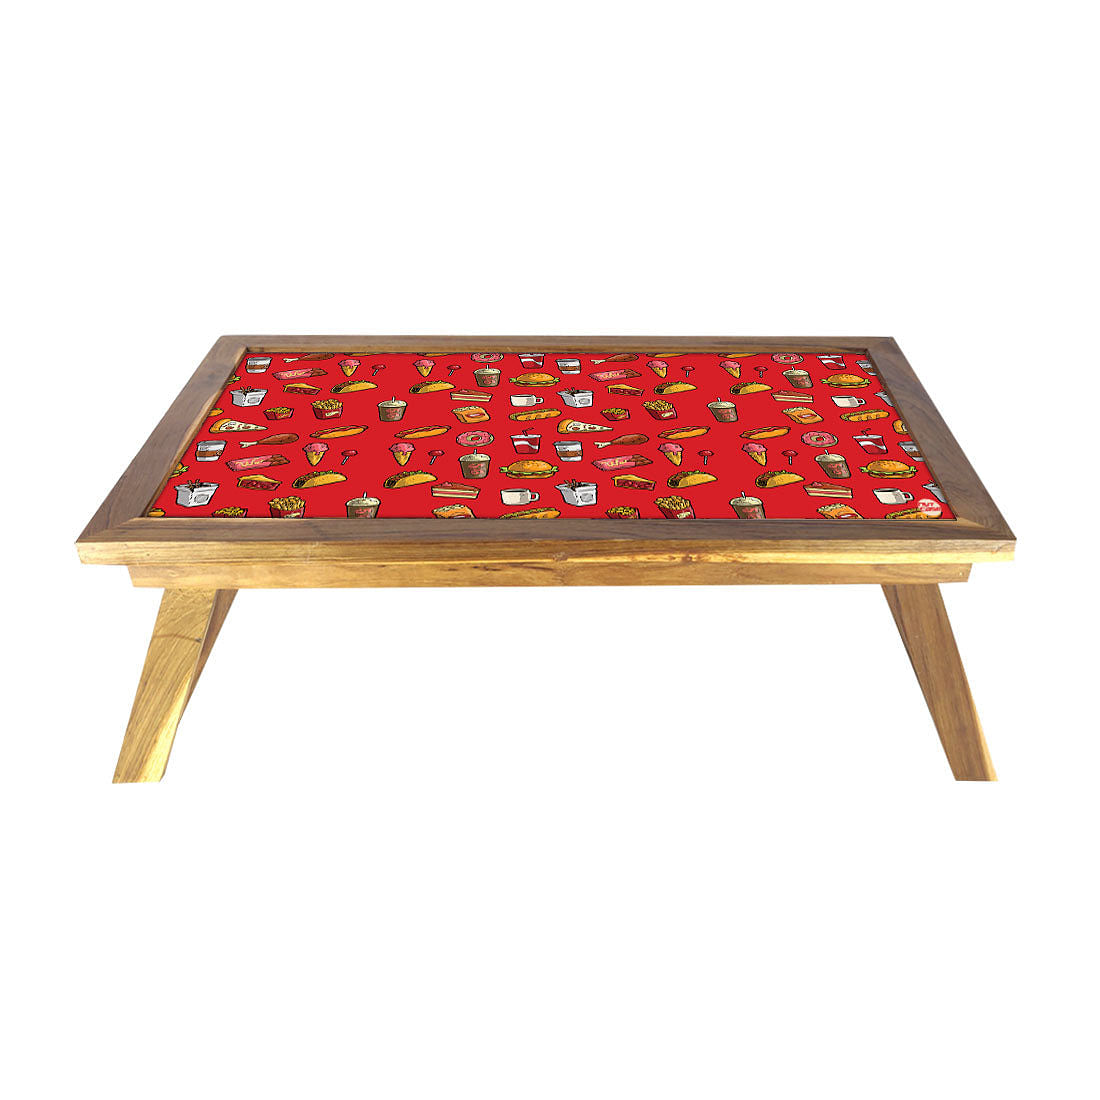 Folding Breakfast Wooden Bed Tray Table For Home Nutcase